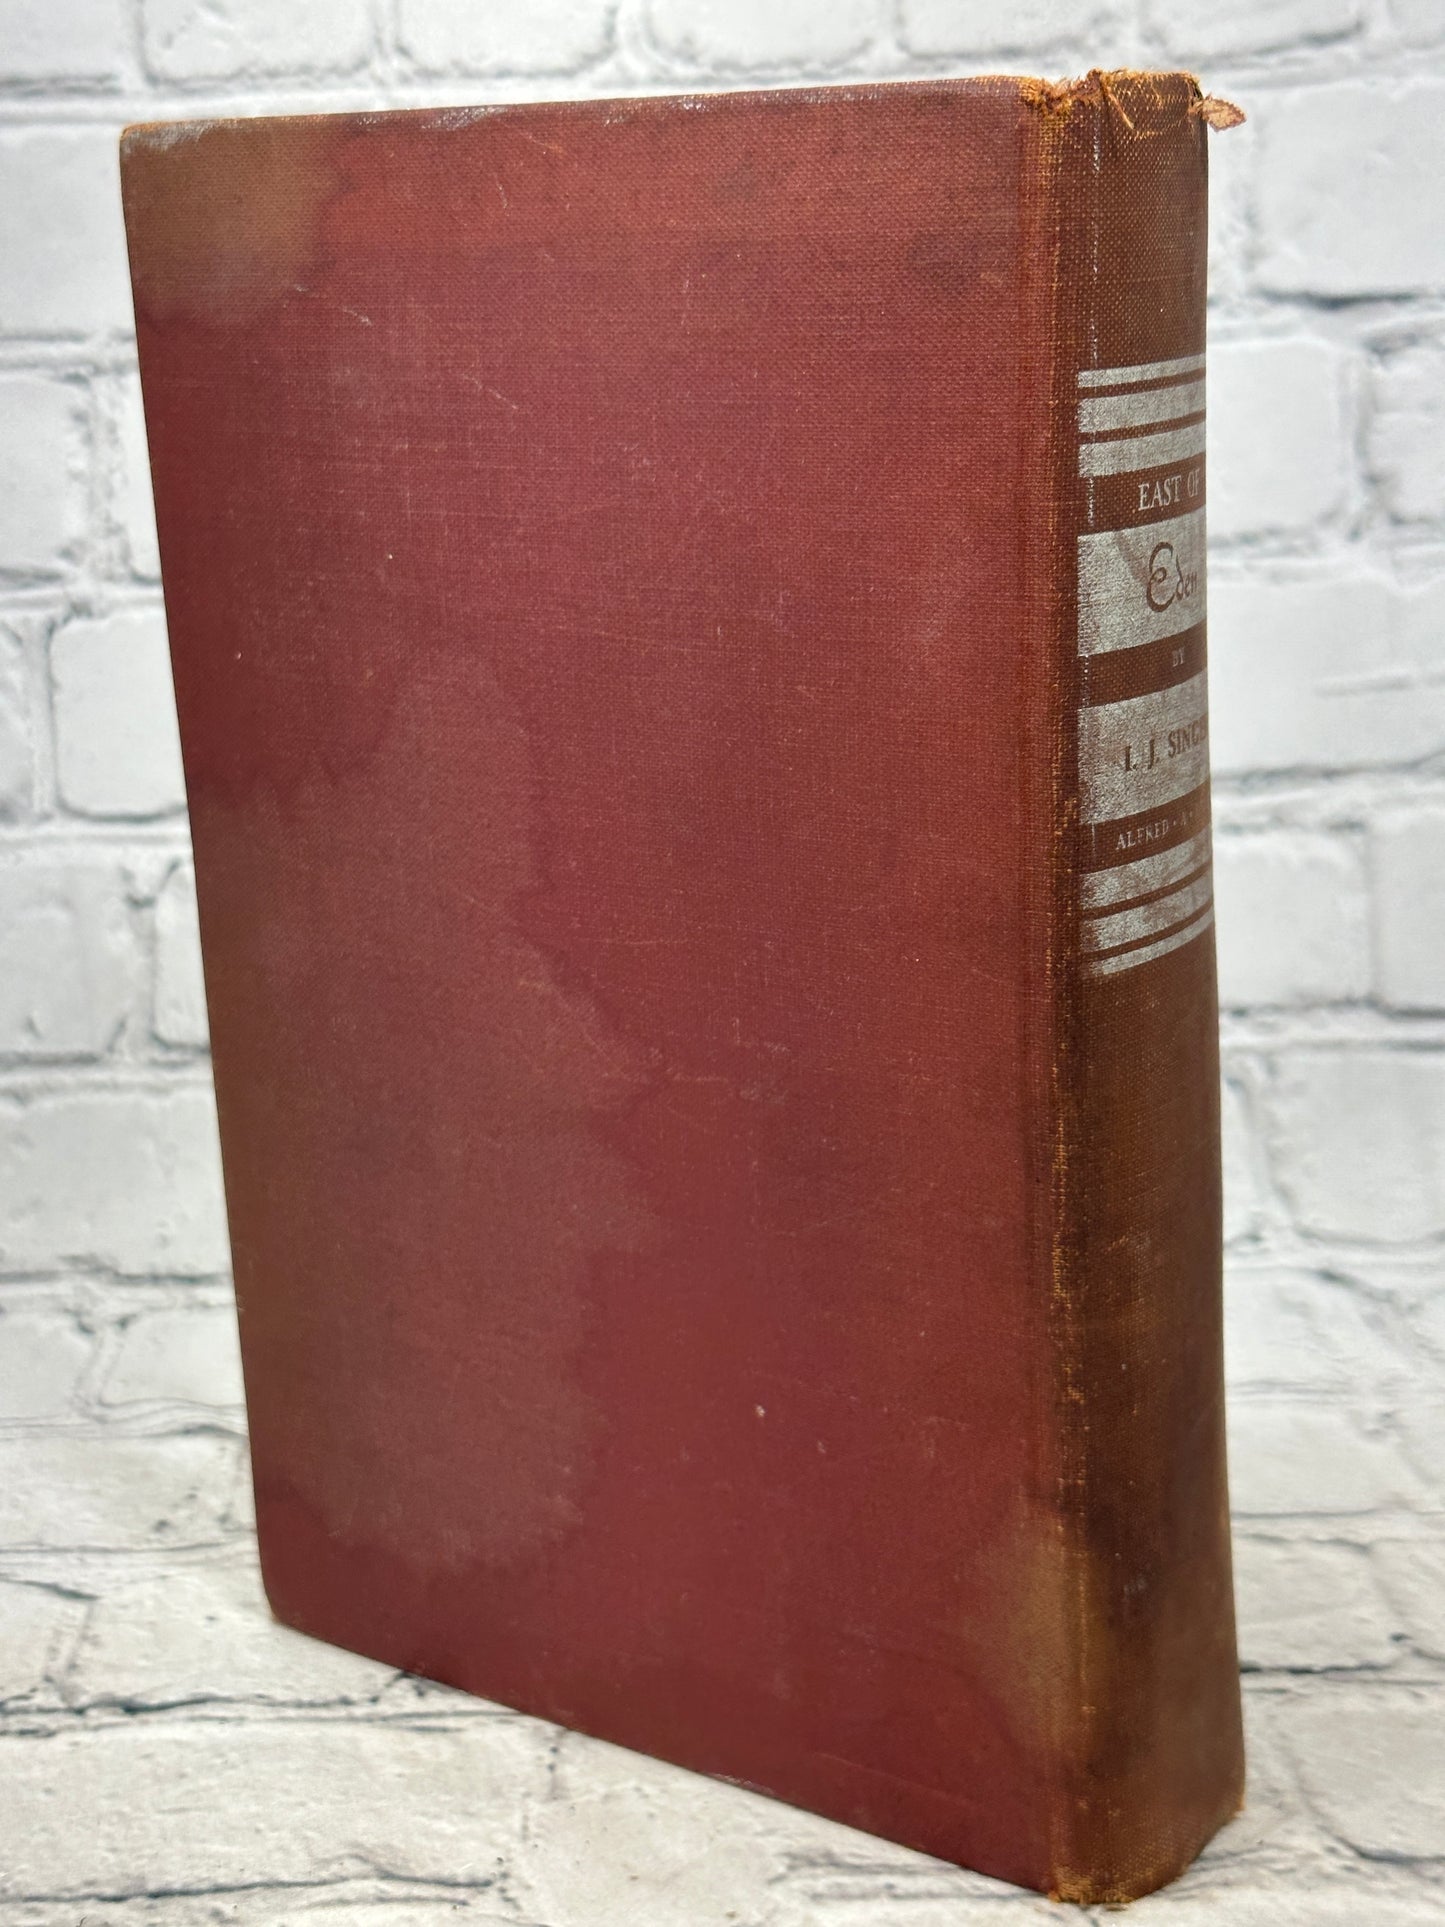 East of Eden by I.J.Singer [1939 · First Edition]